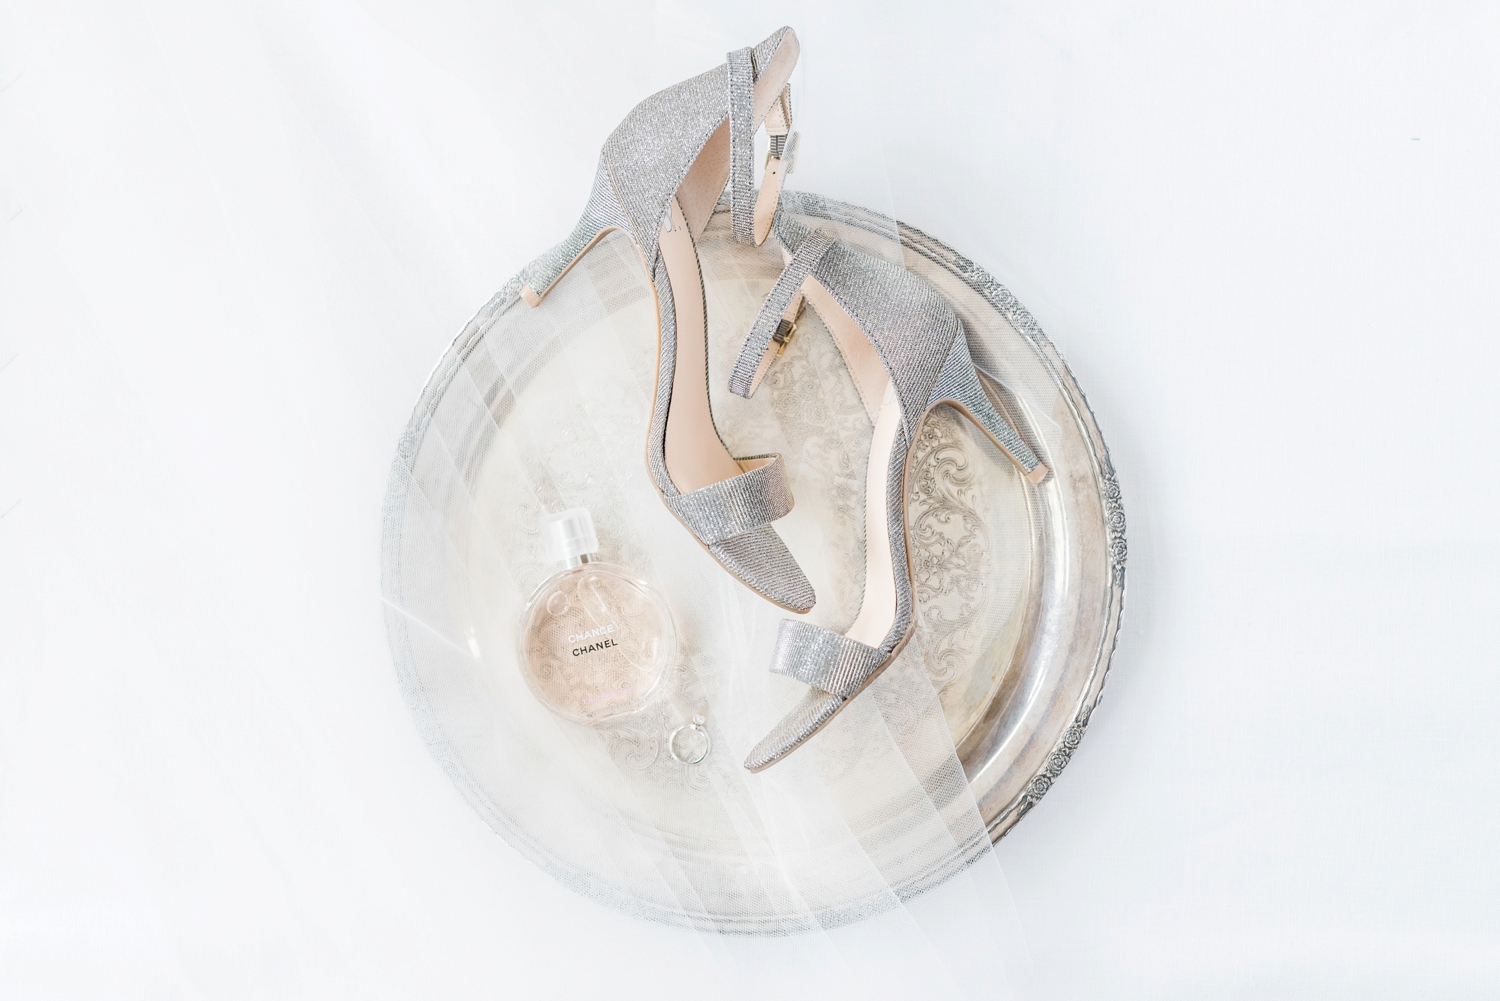 silver-tray-with-wedding-shoes-and-veil-and-perfume-styled-on-top-of-it